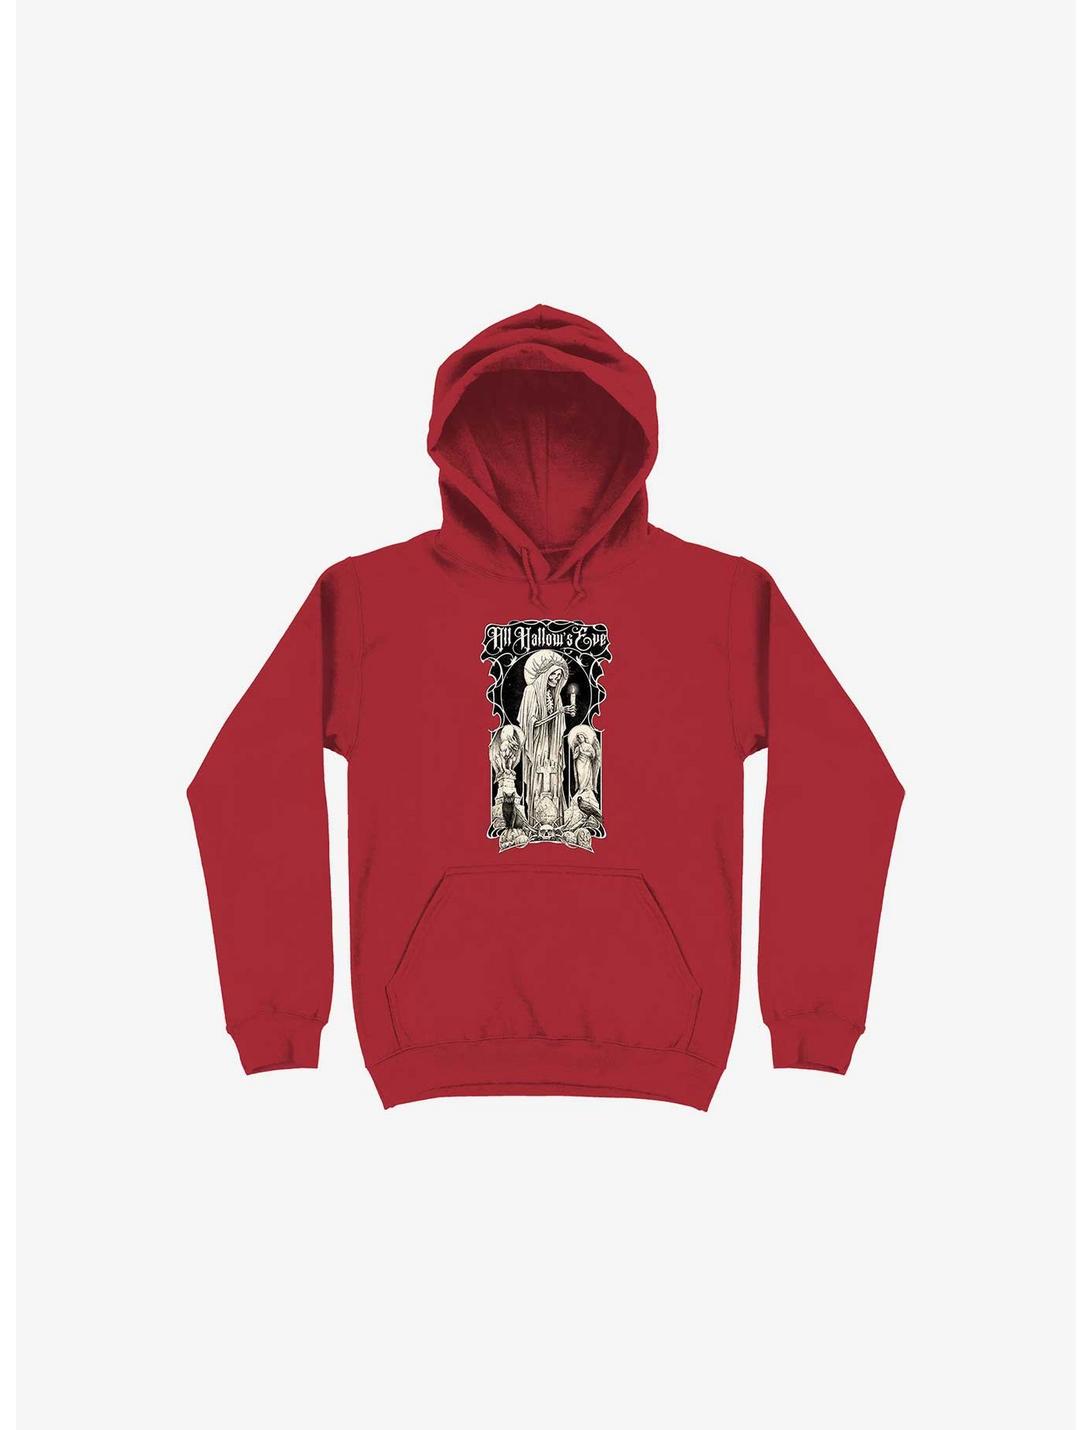 All Hallow's Eve Red Hoodie, RED, hi-res